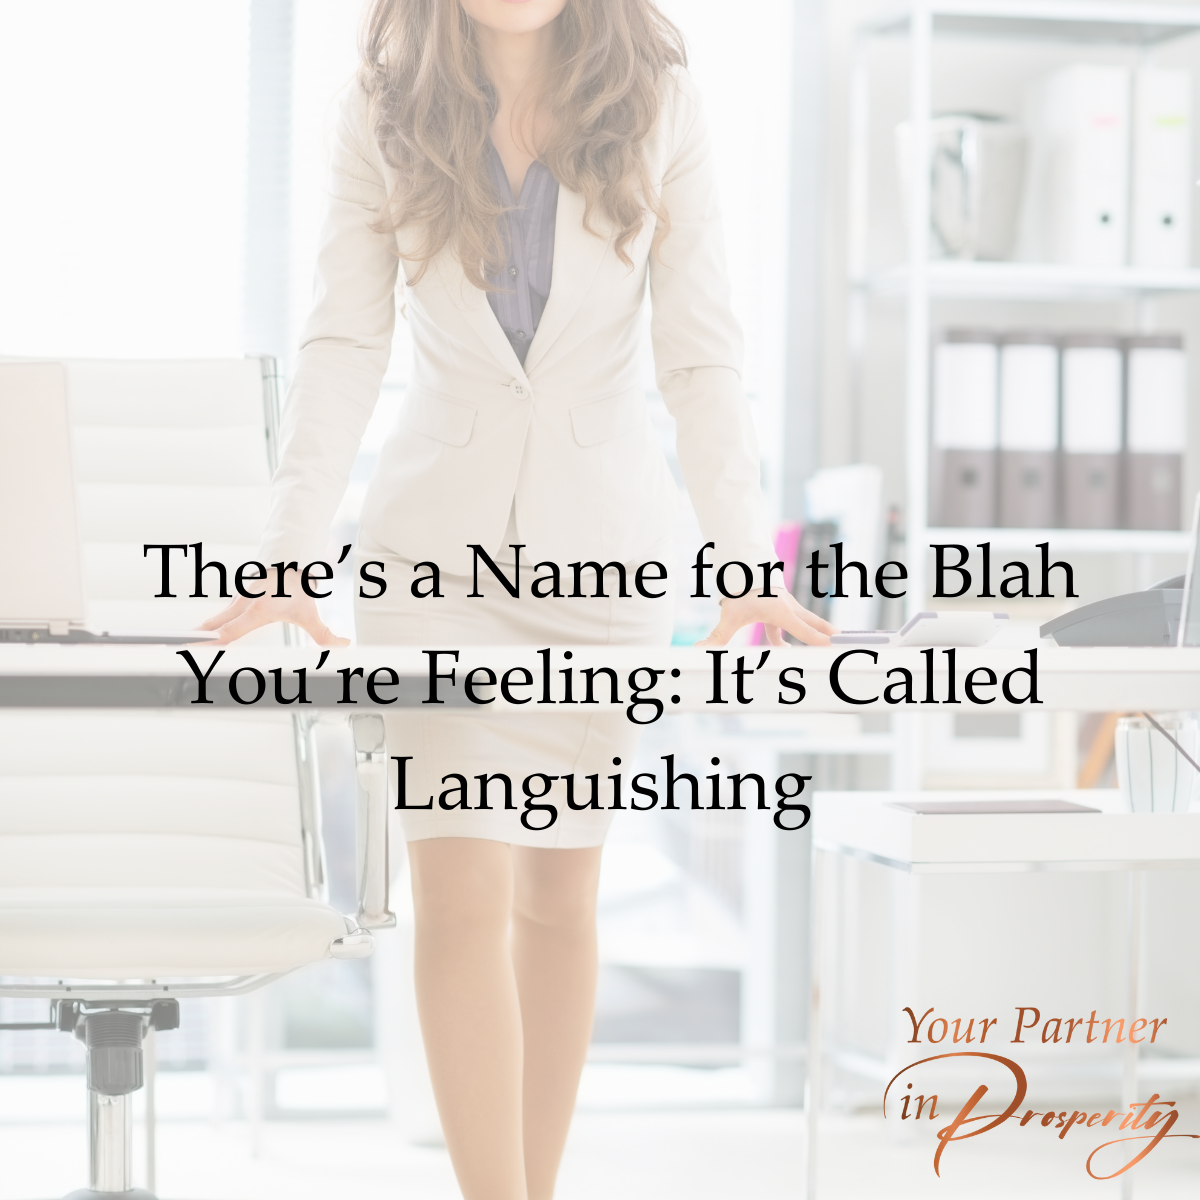 There’s a Name for the Blah You’re Feeling: It’s Called Languishing